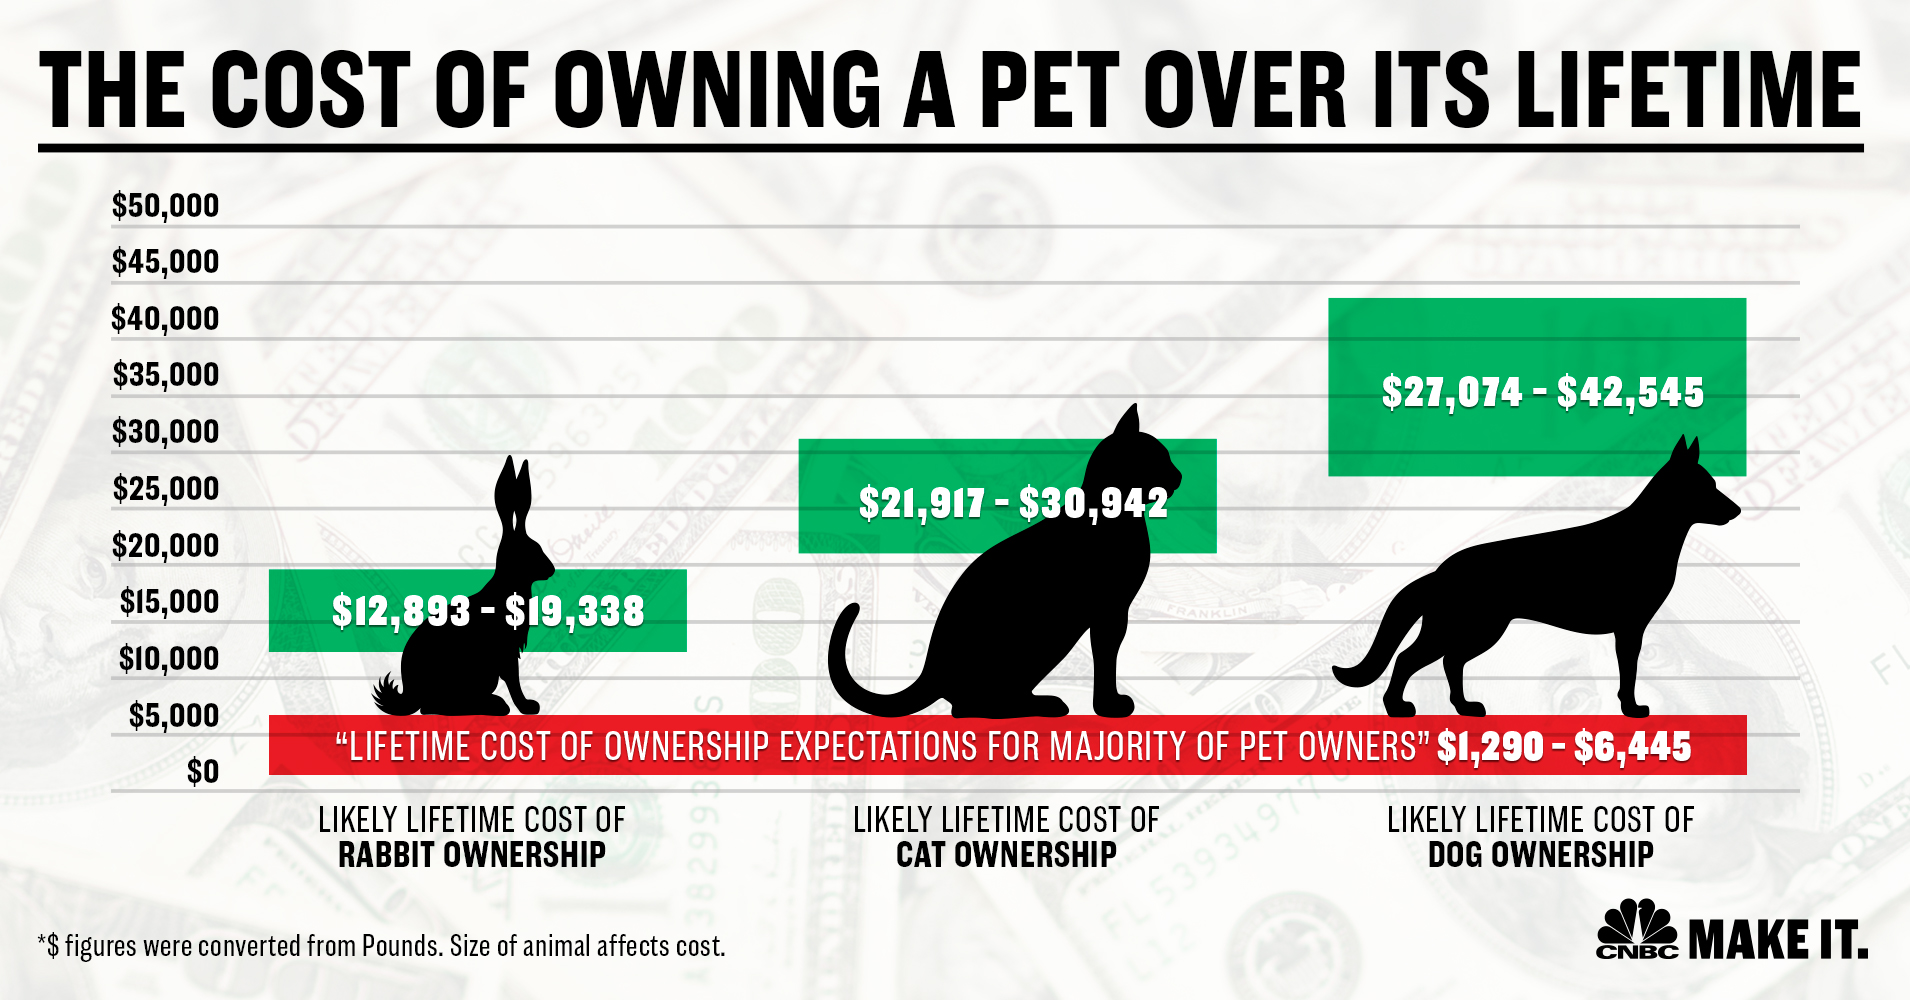 How much does it cost to own a dog 7 times more than you